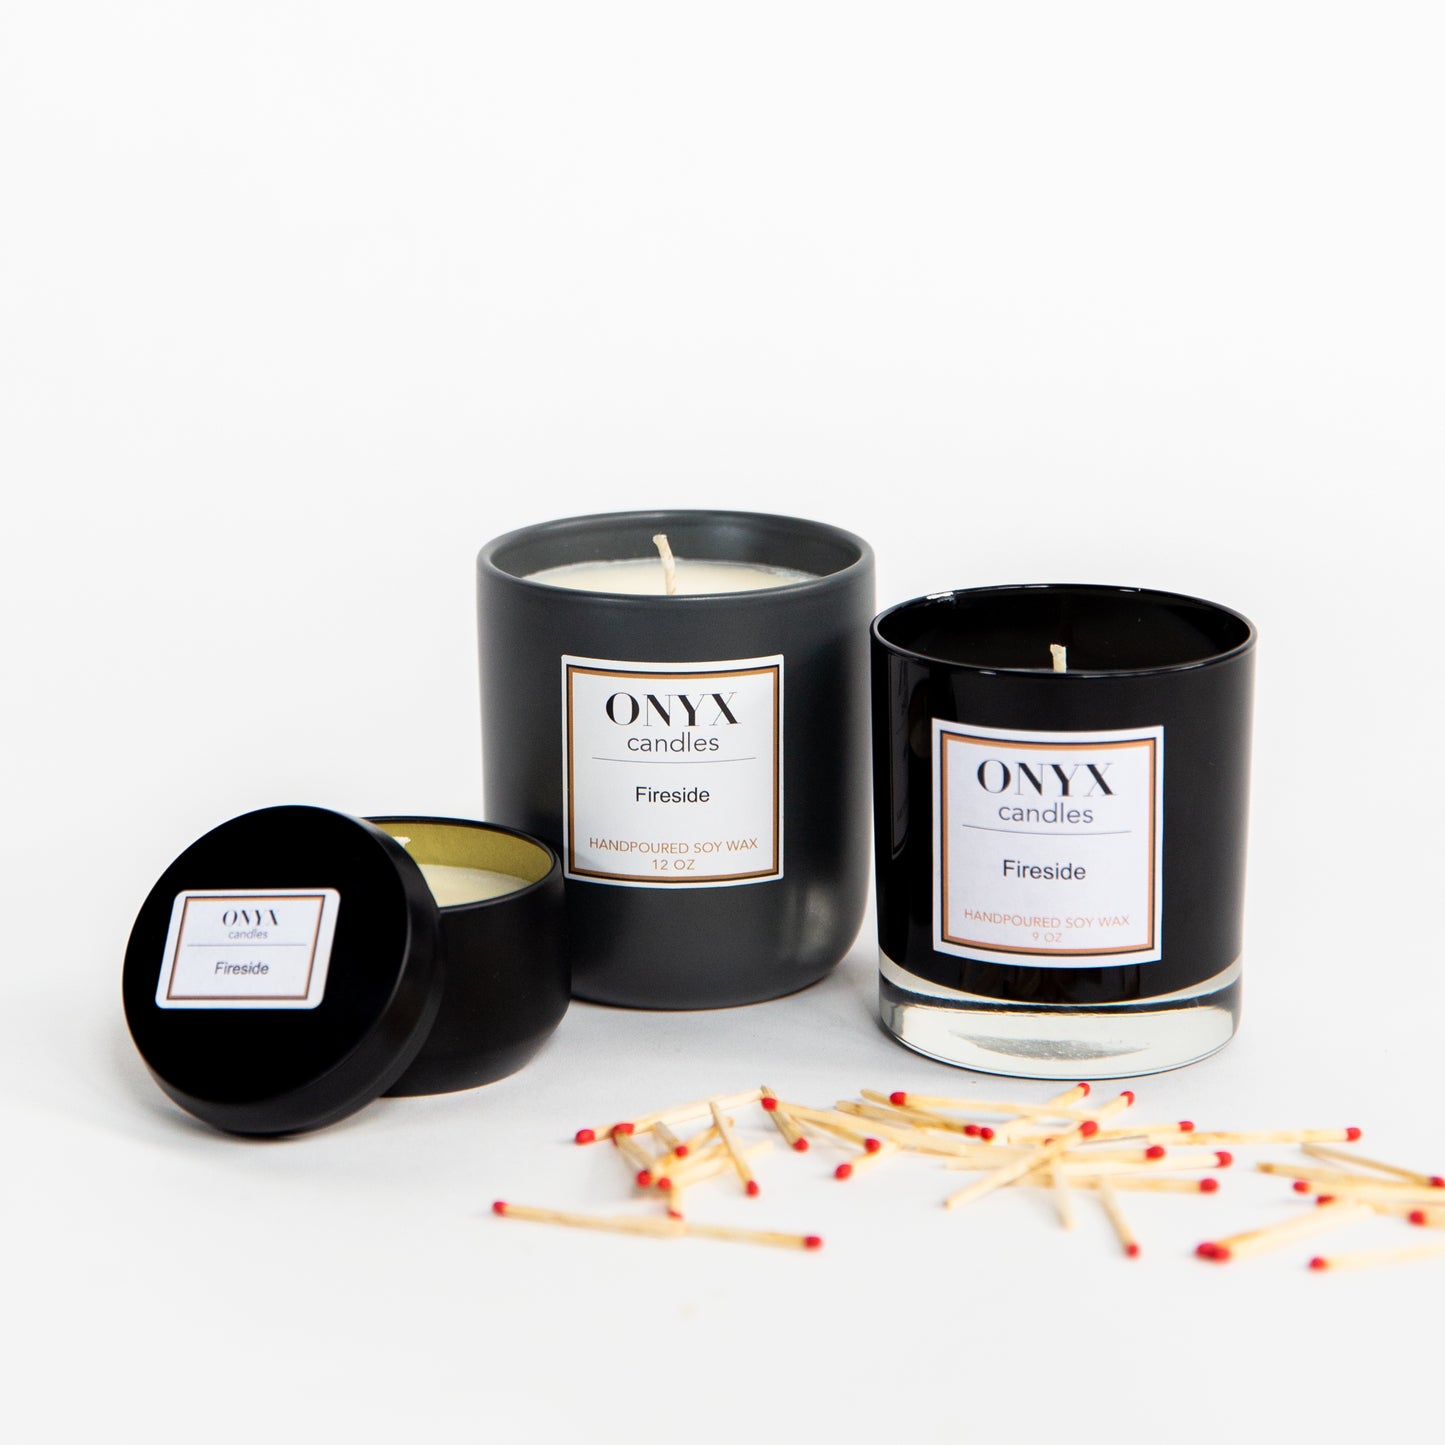 Pictured are three size options for the Fireside scented candle by Onyx Candles